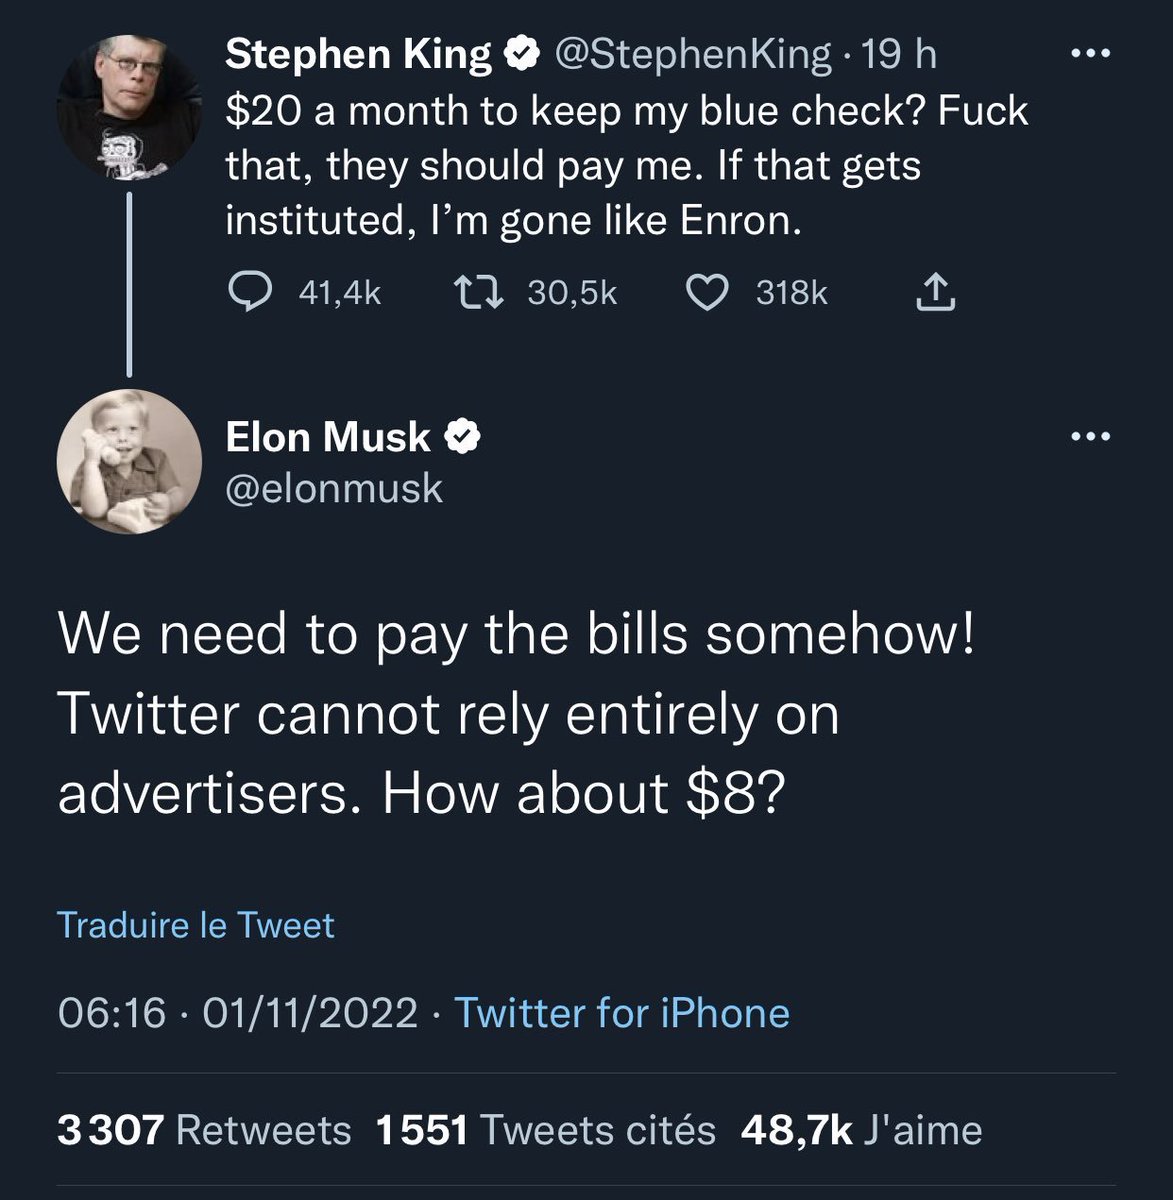 Stephen King understands how value is created in Twitter's business model. Elon Musk doesn't seem to get it. #MigrateToMastodon